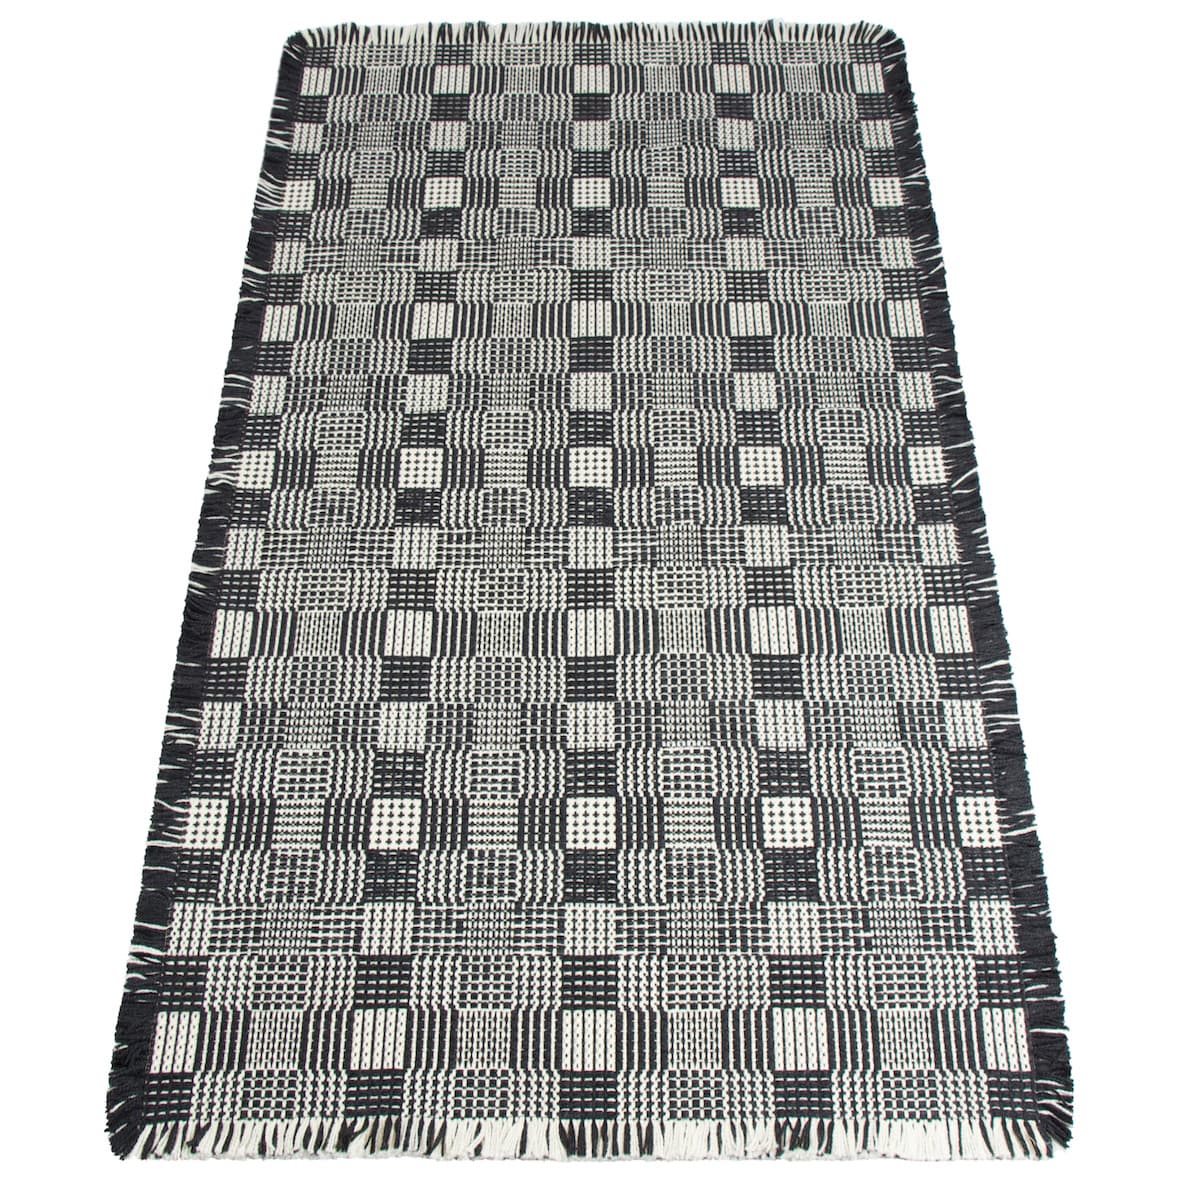 Chequered Black Rug by Roger Oates for AUTHOR's collection of British-made homeware